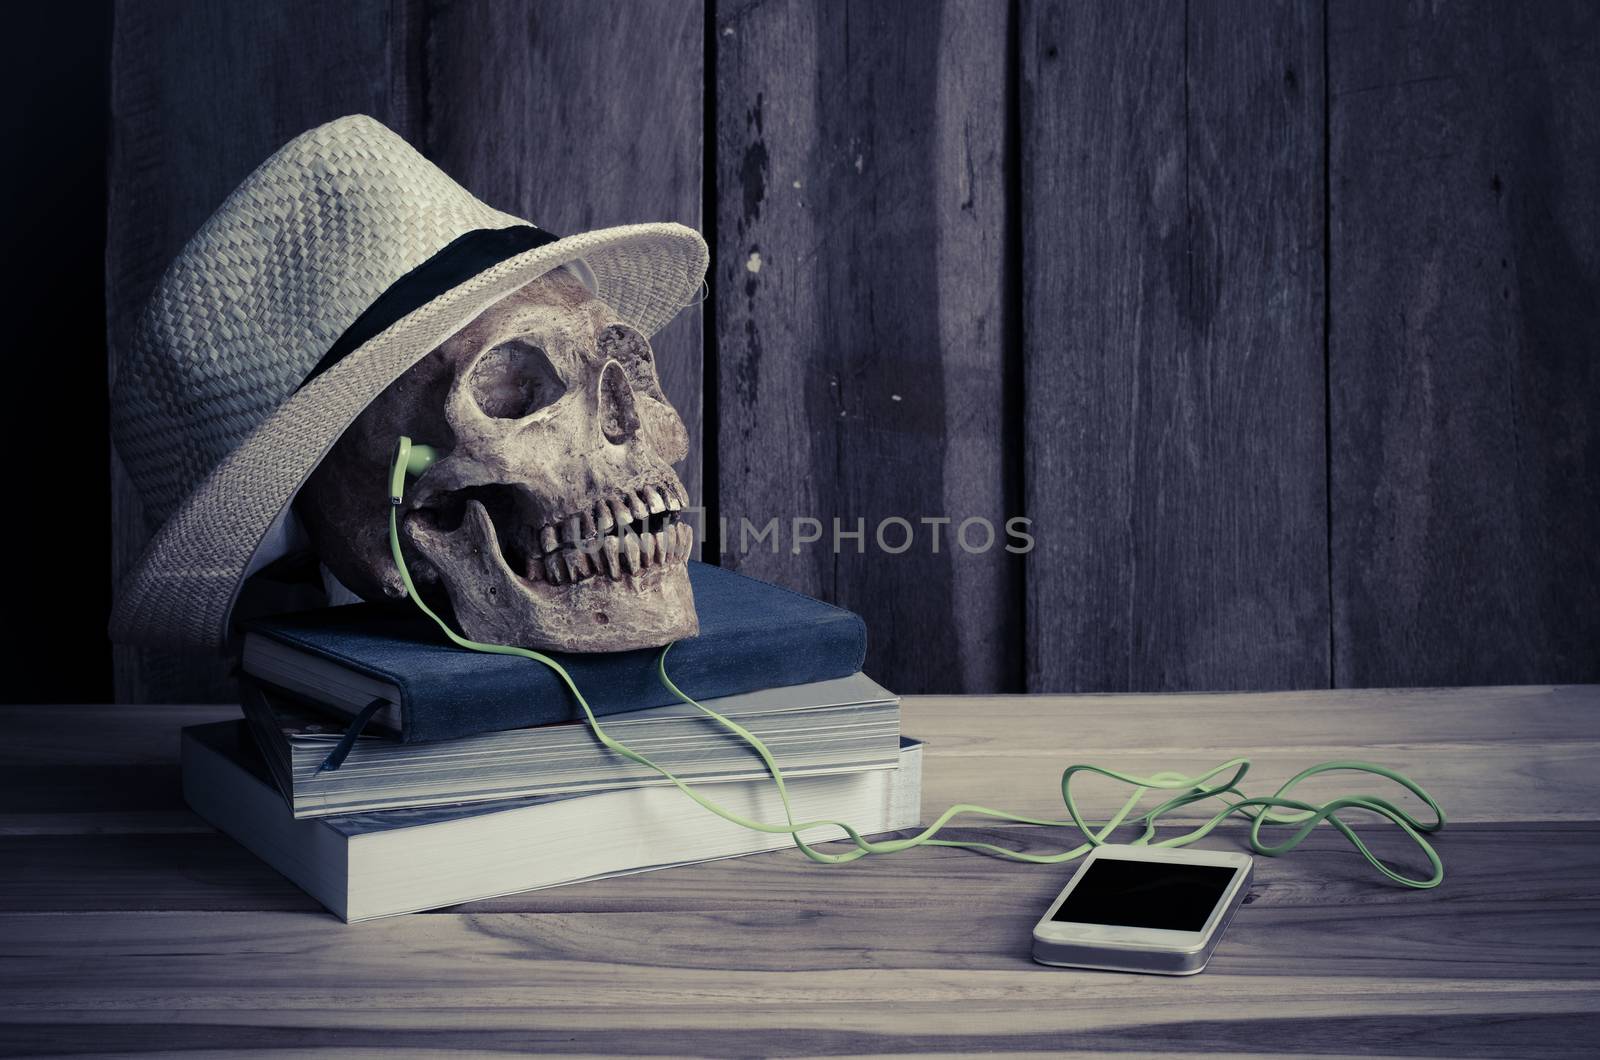 still life - skull have headphone on books and hat on wooden table